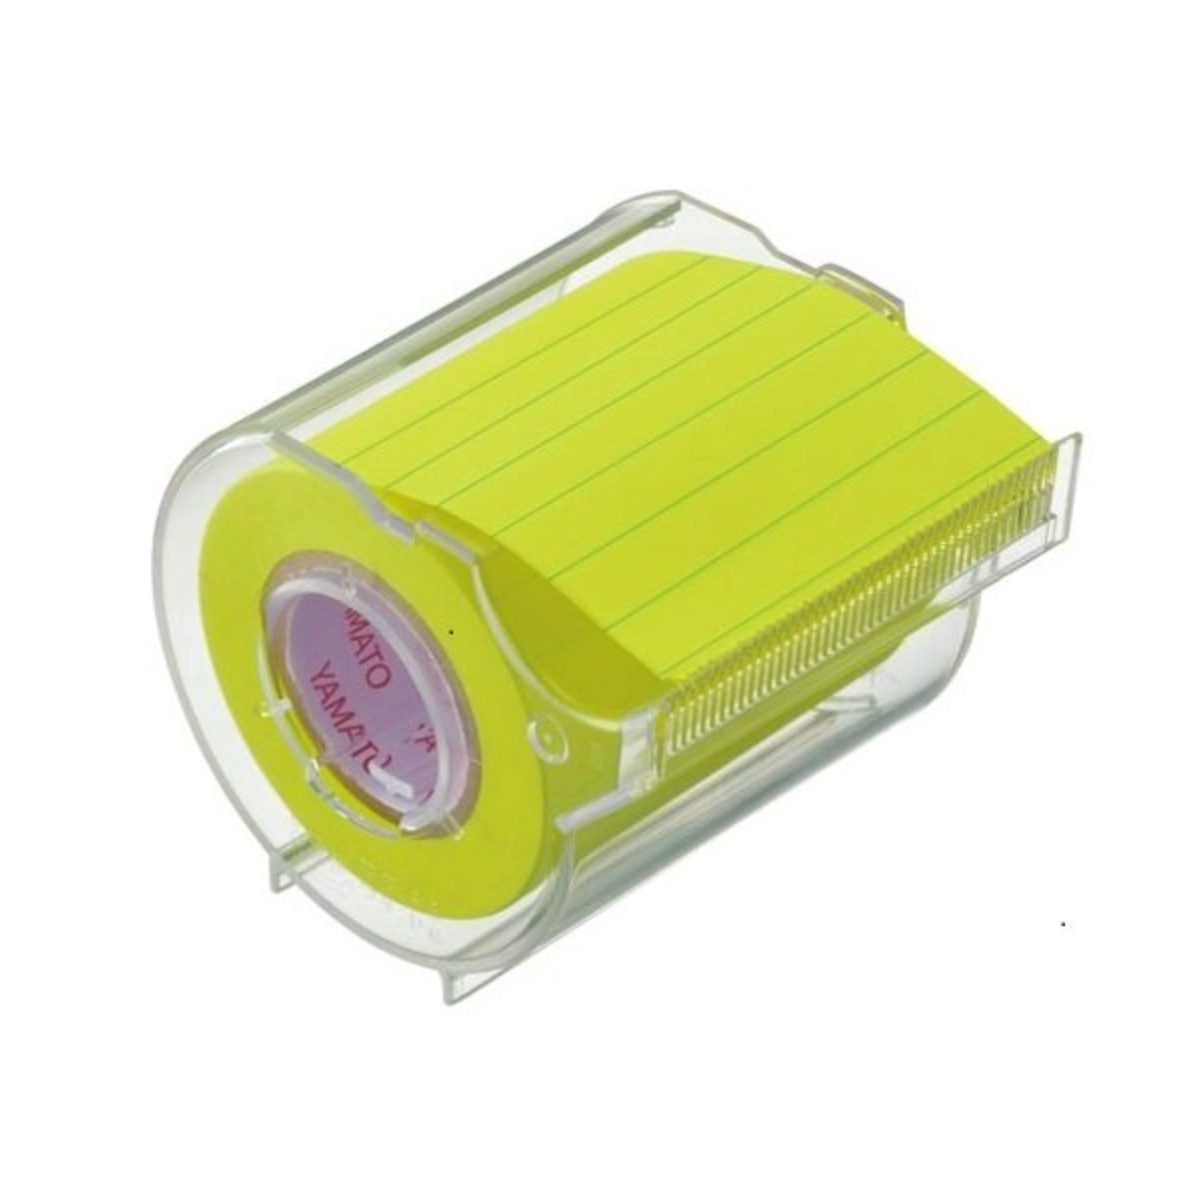 Memoc roll - ruled with dispenser